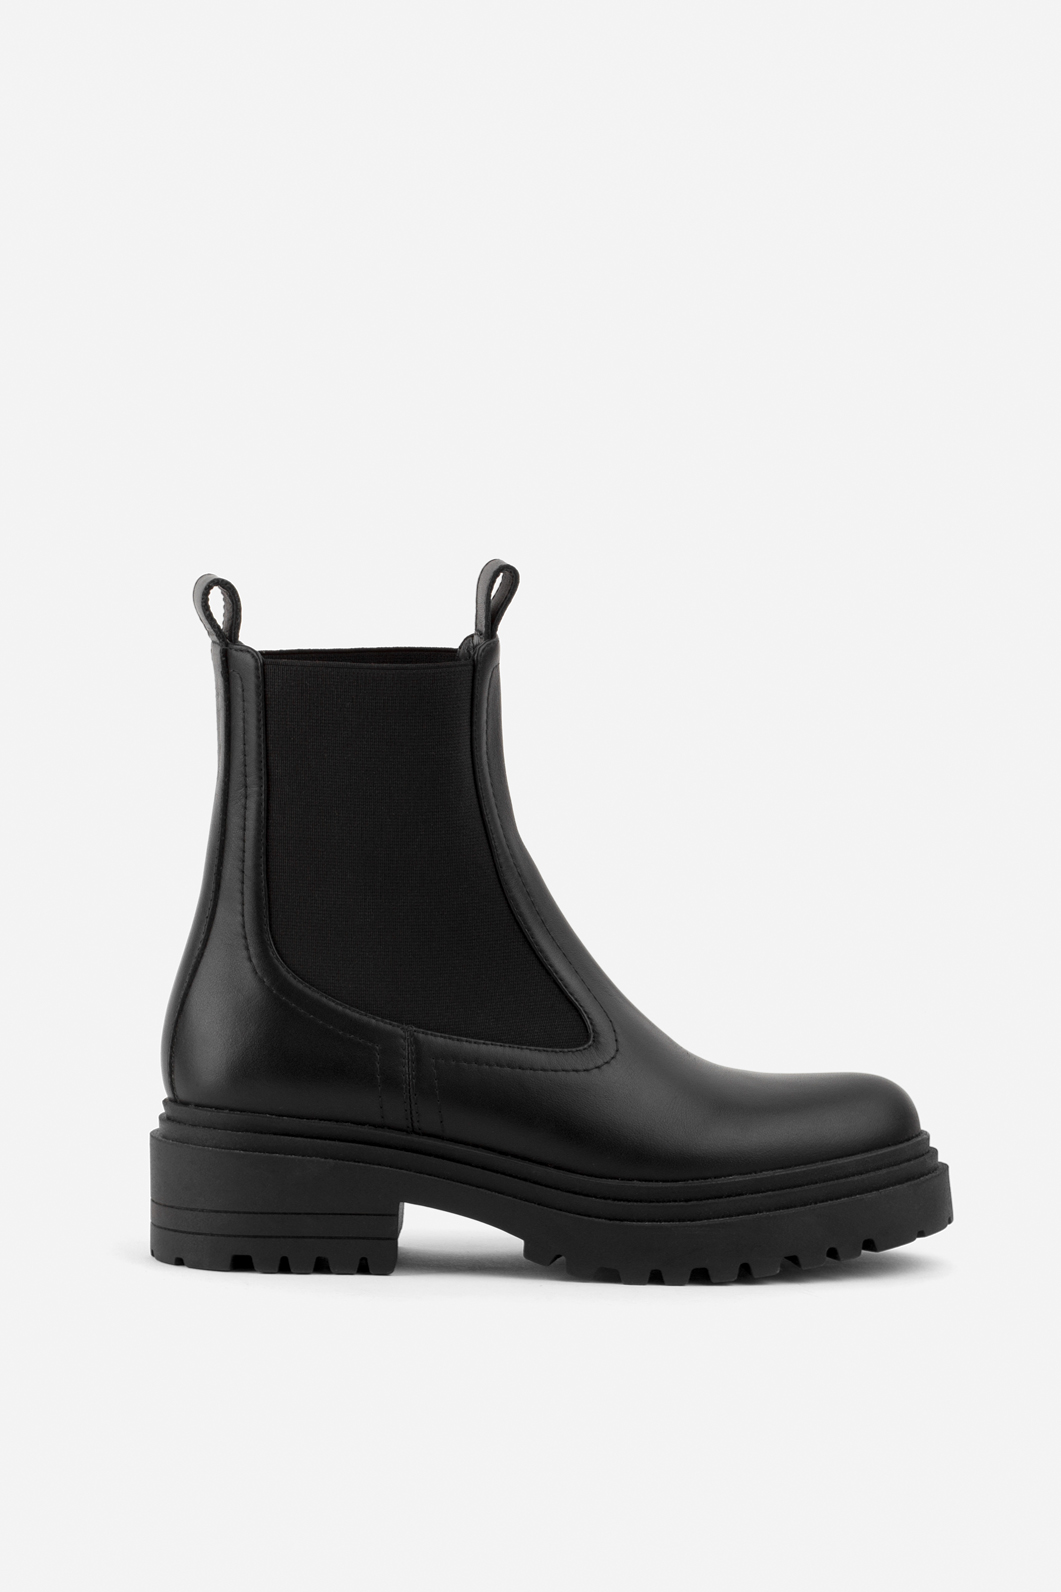 Ava black leather
chelsea boots